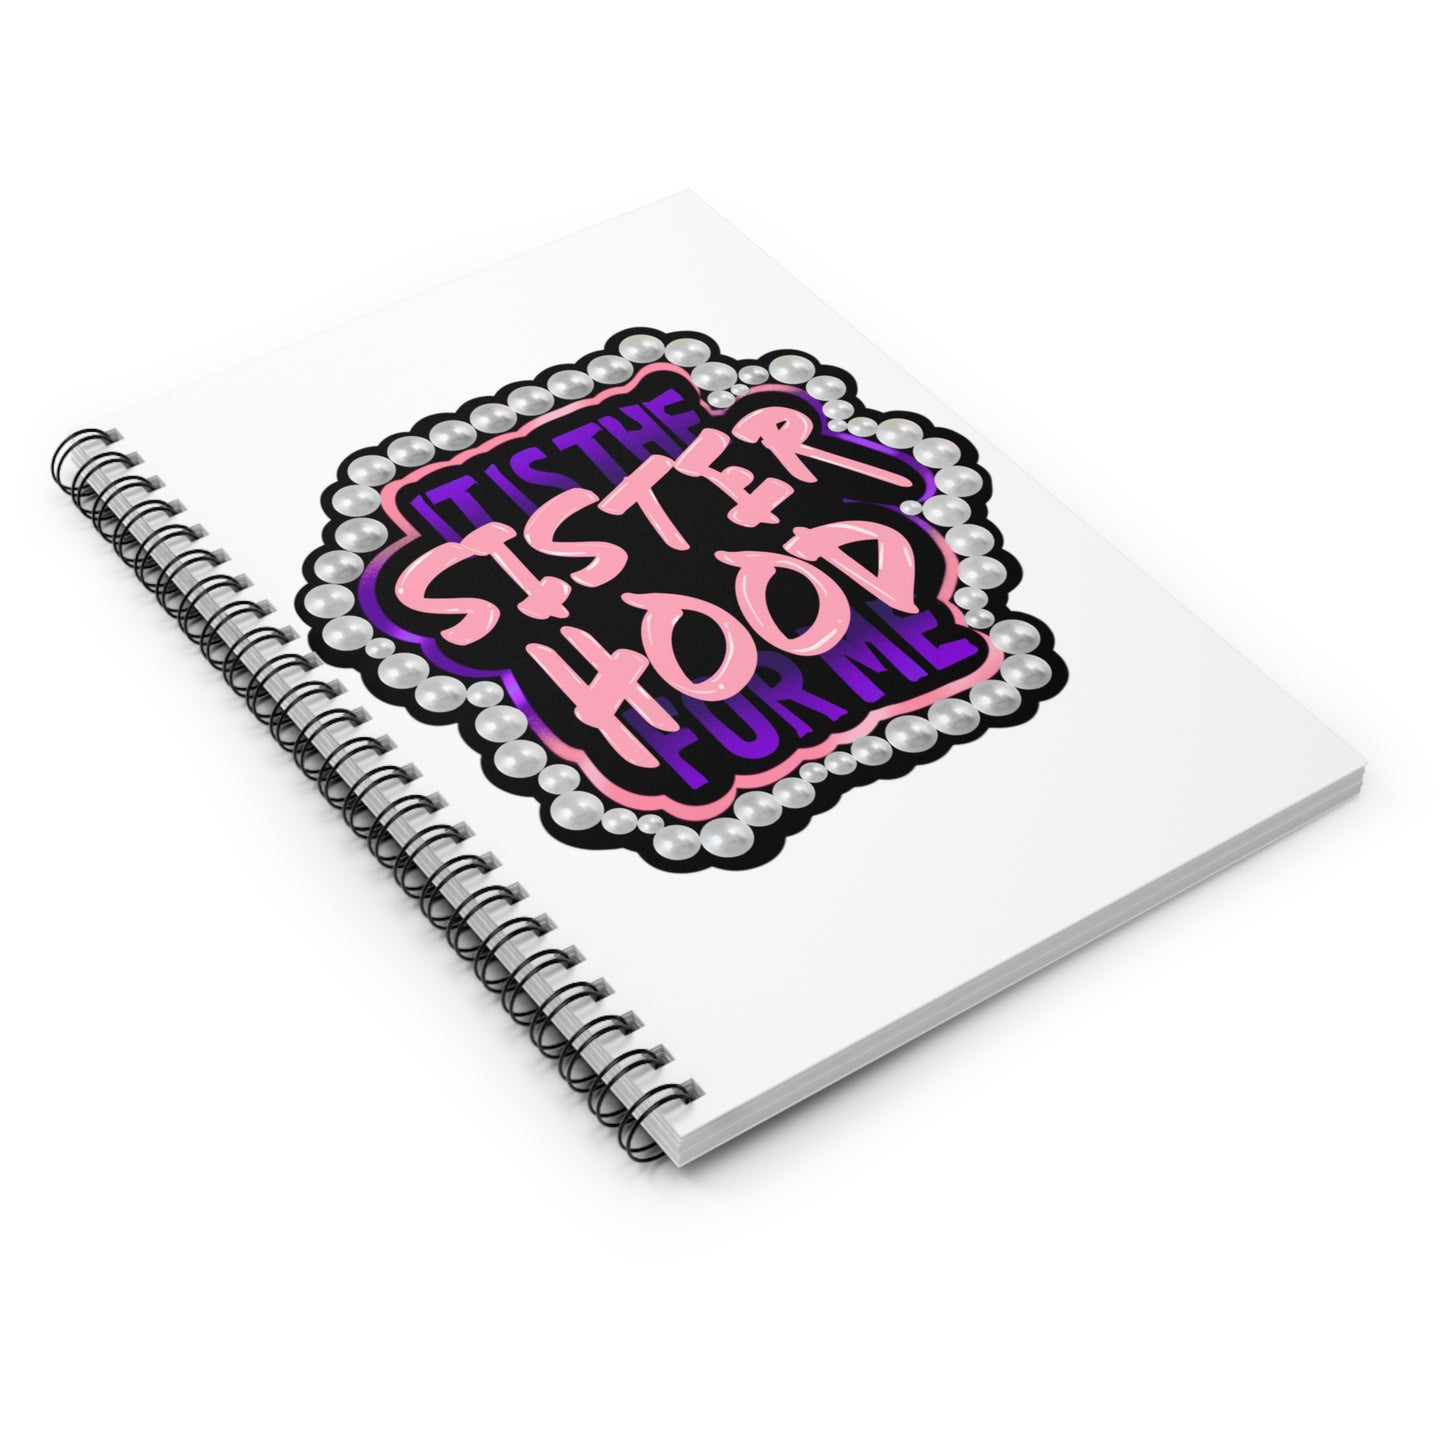 It's the Sisterhood (White) Spiral Notebook - Ruled Line